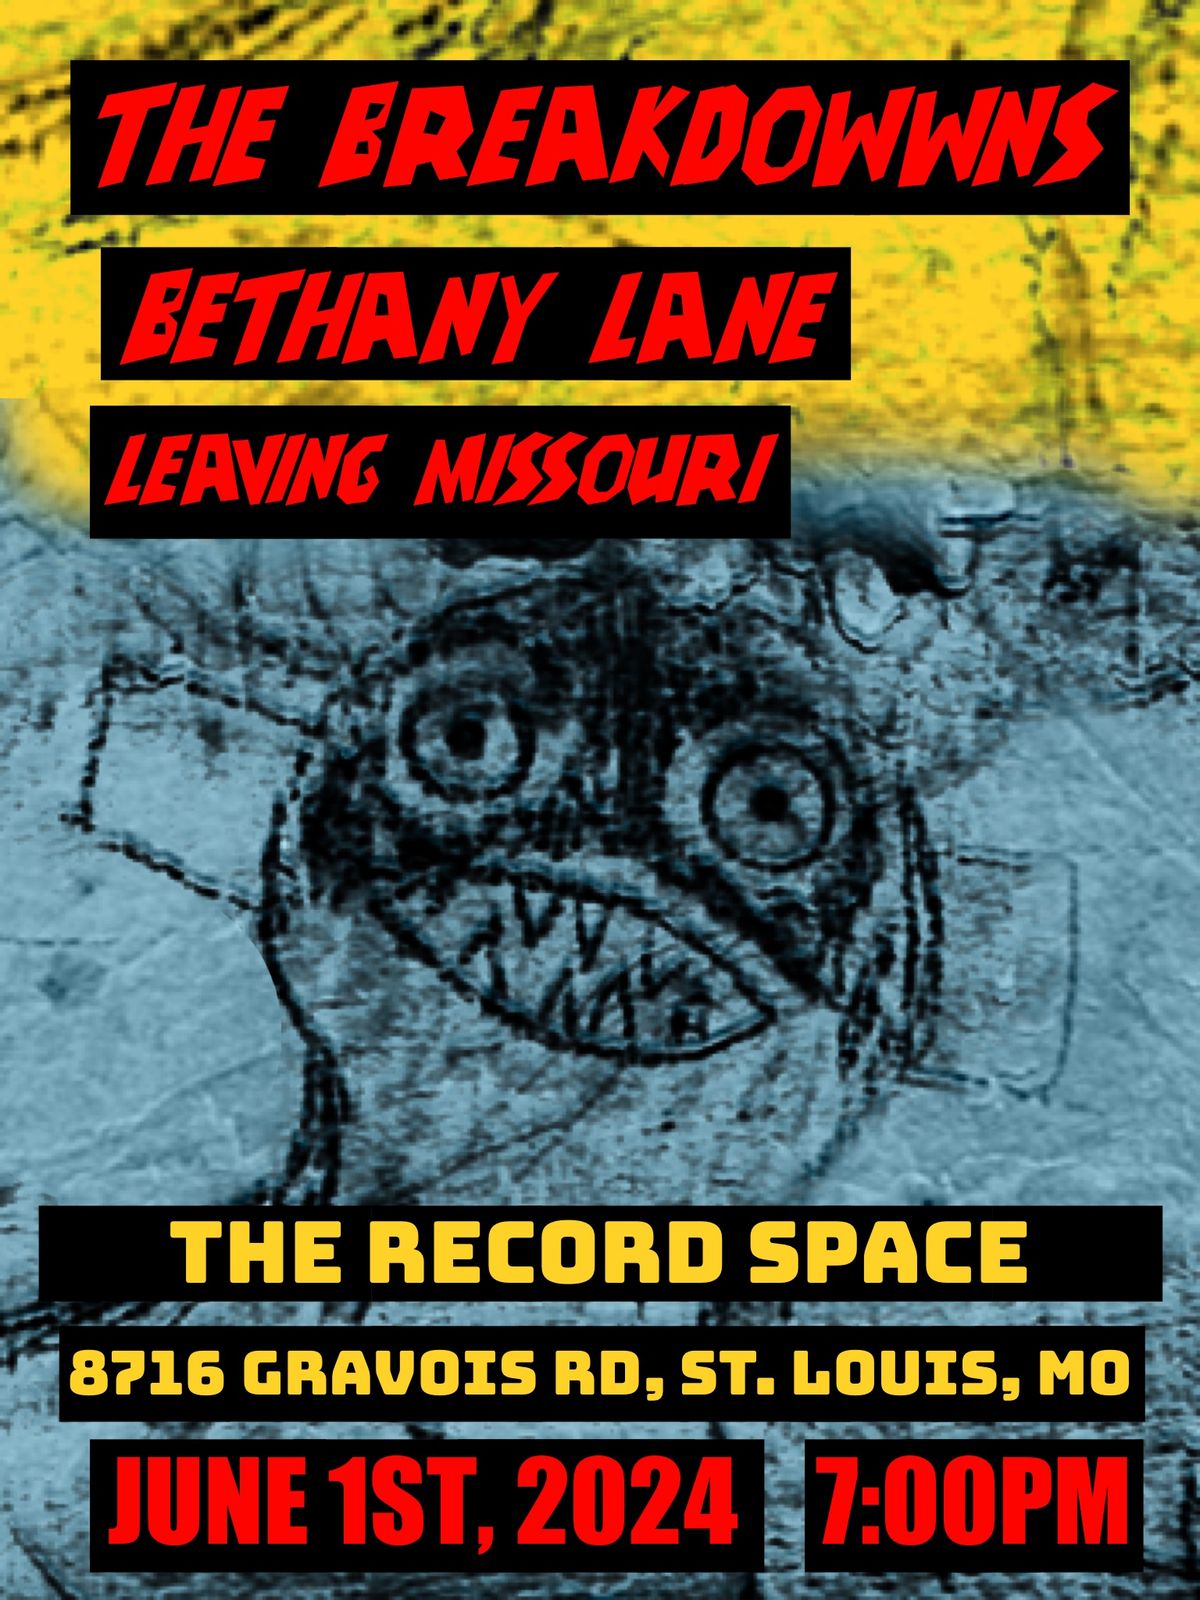 The Breakdowwns + Bethany Lane + Leaving Missouri at The Record Space